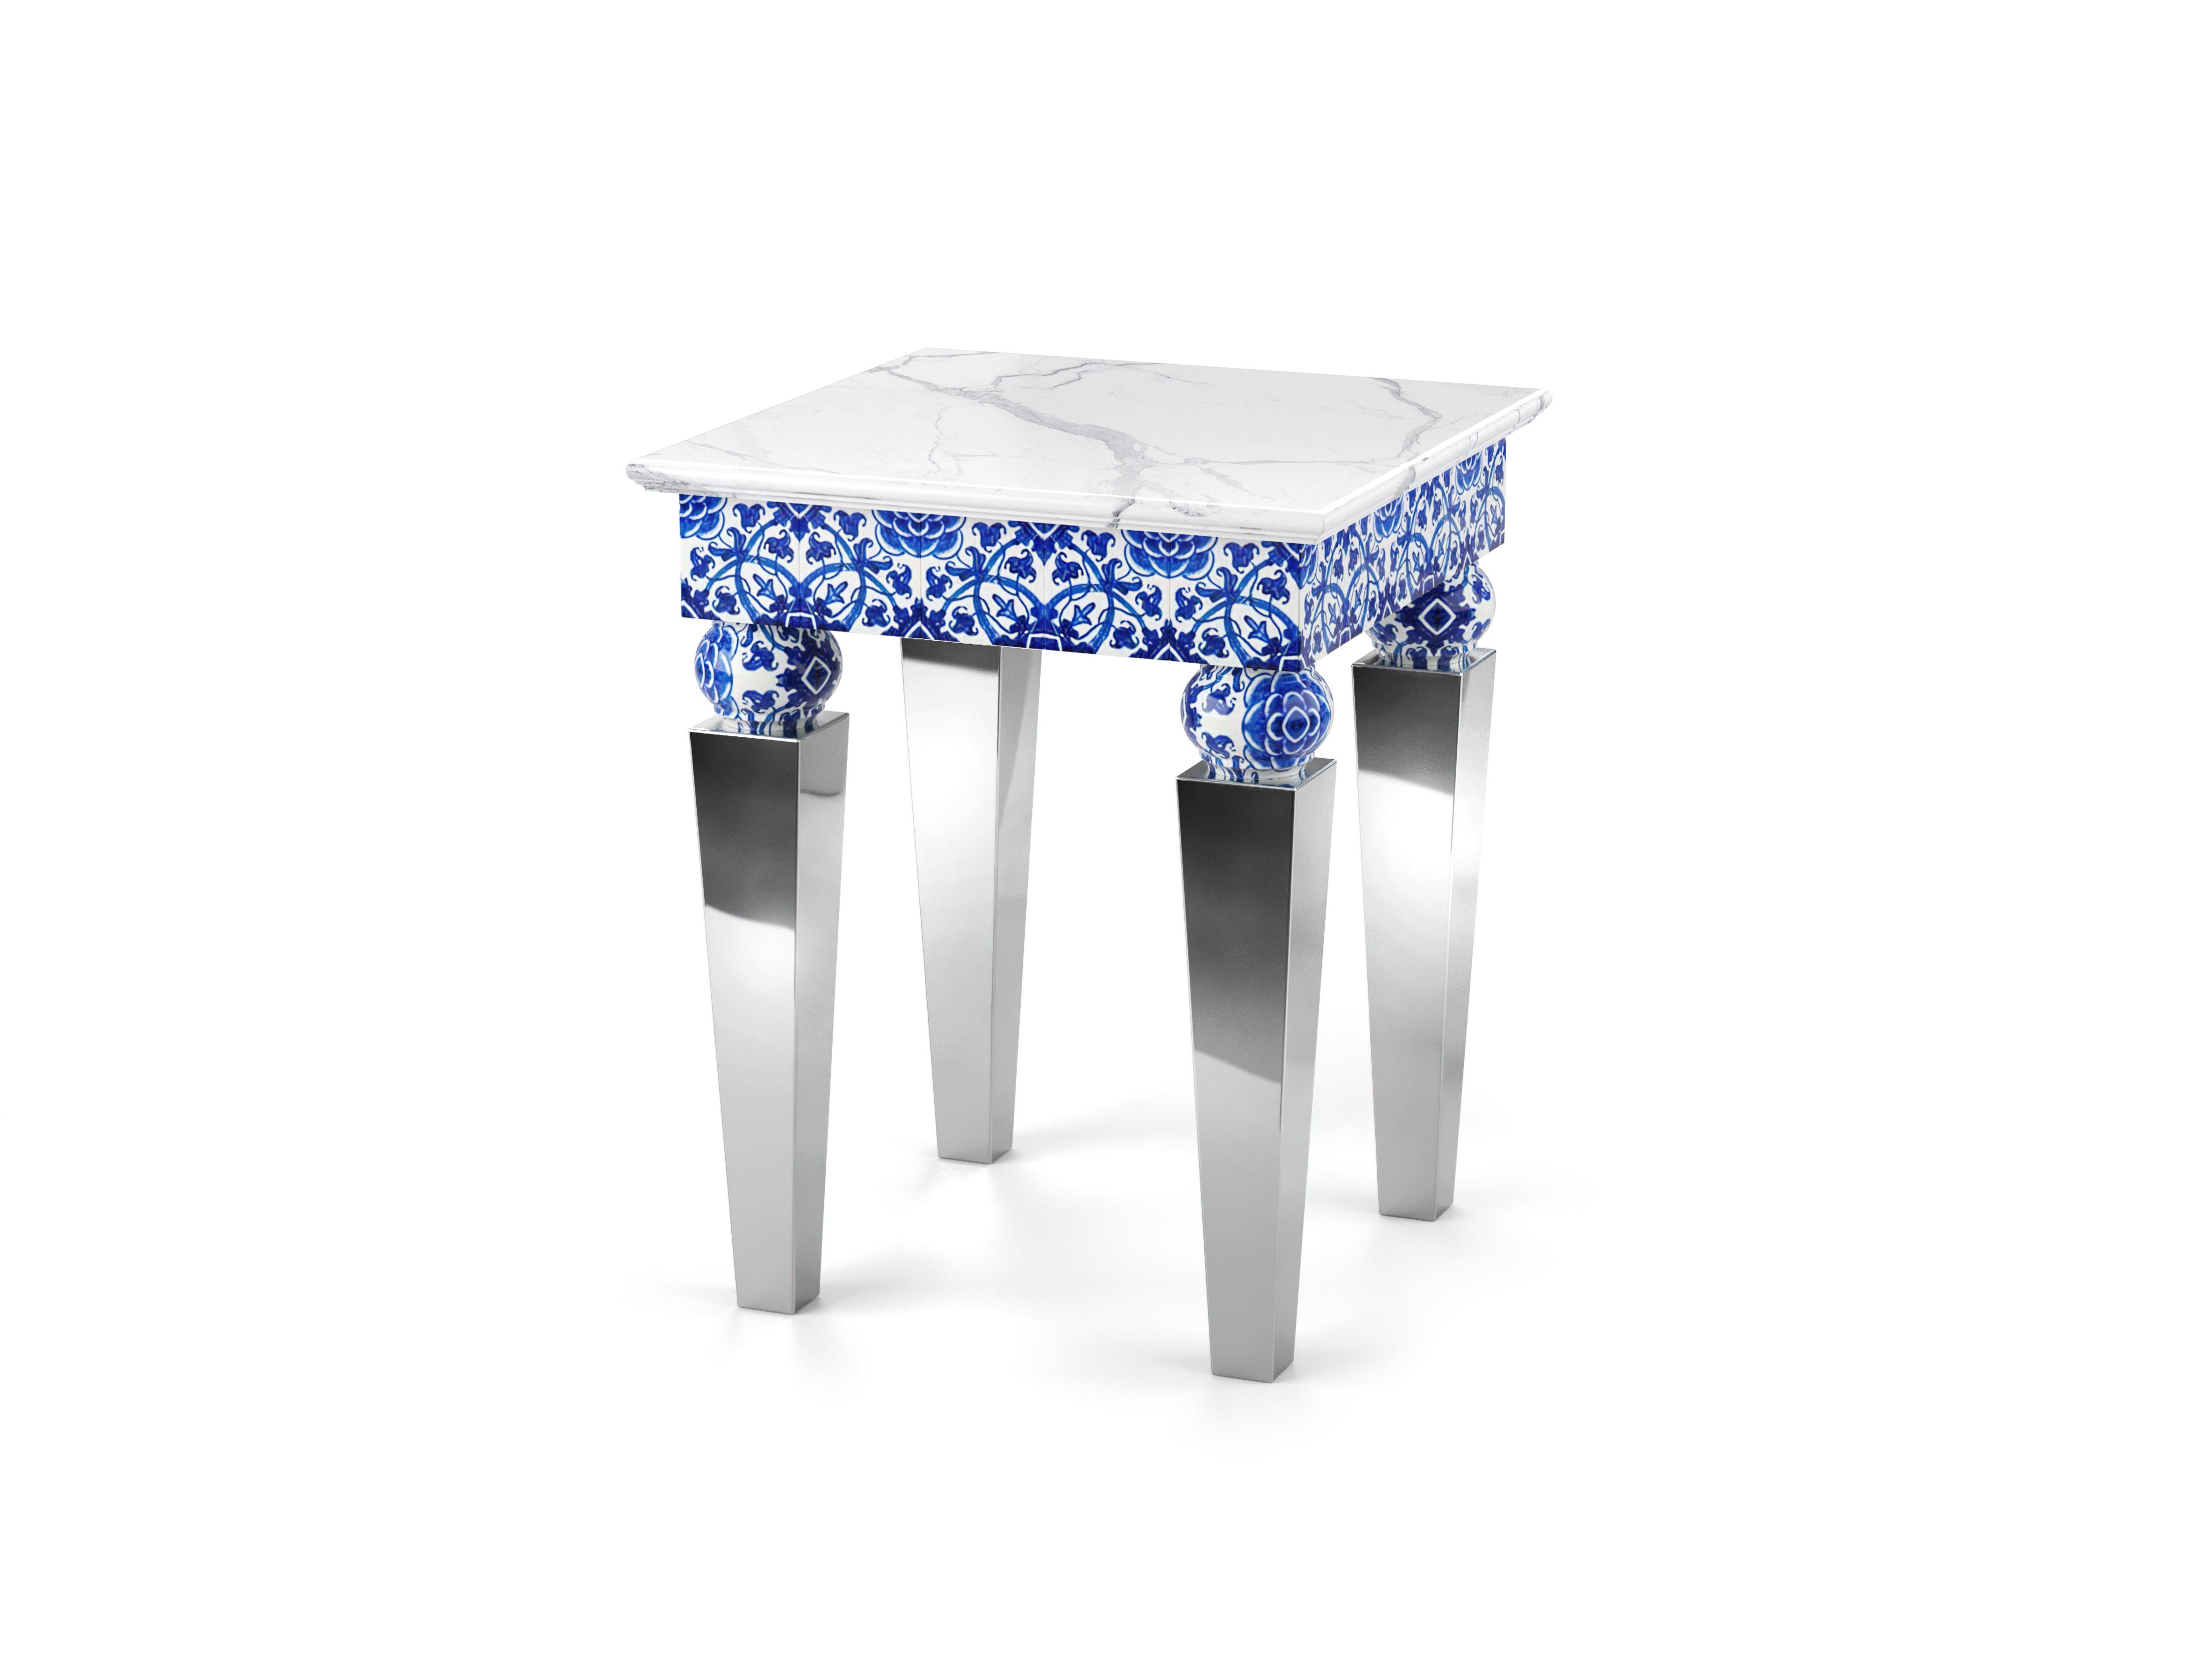 Contemporary Side Table White Marble Top Mirror Steel Legs Green Majolica Tiles, Also Outdoor For Sale